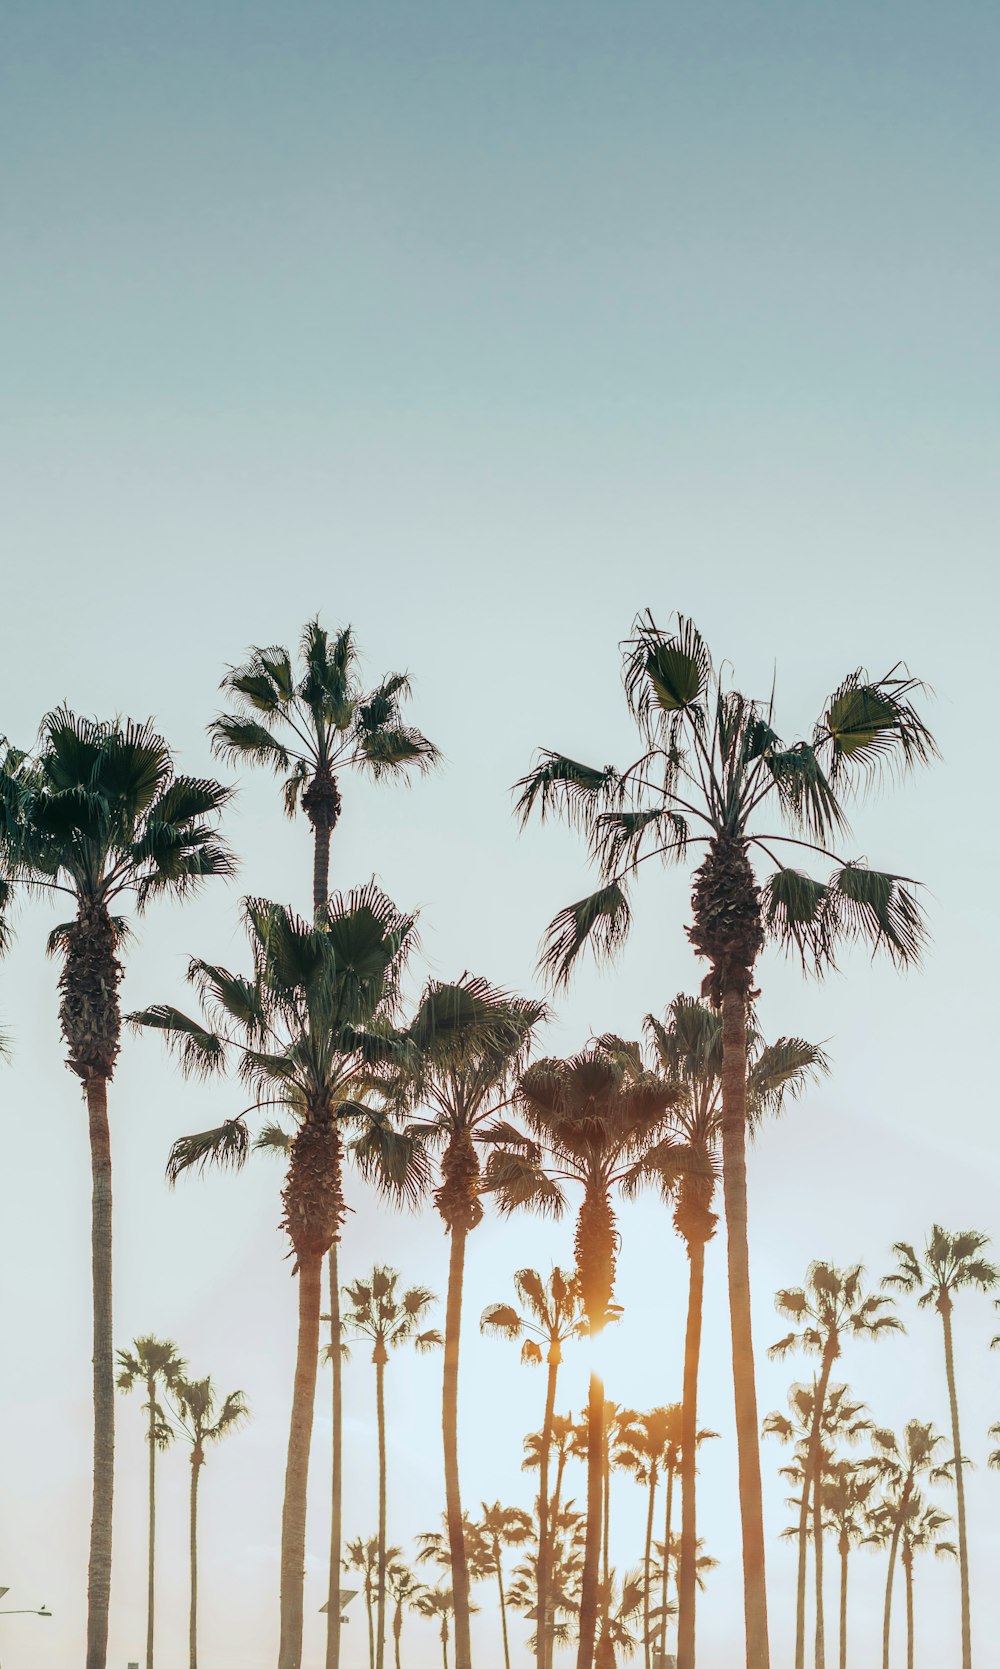 a group of palm trees with the sun in the background